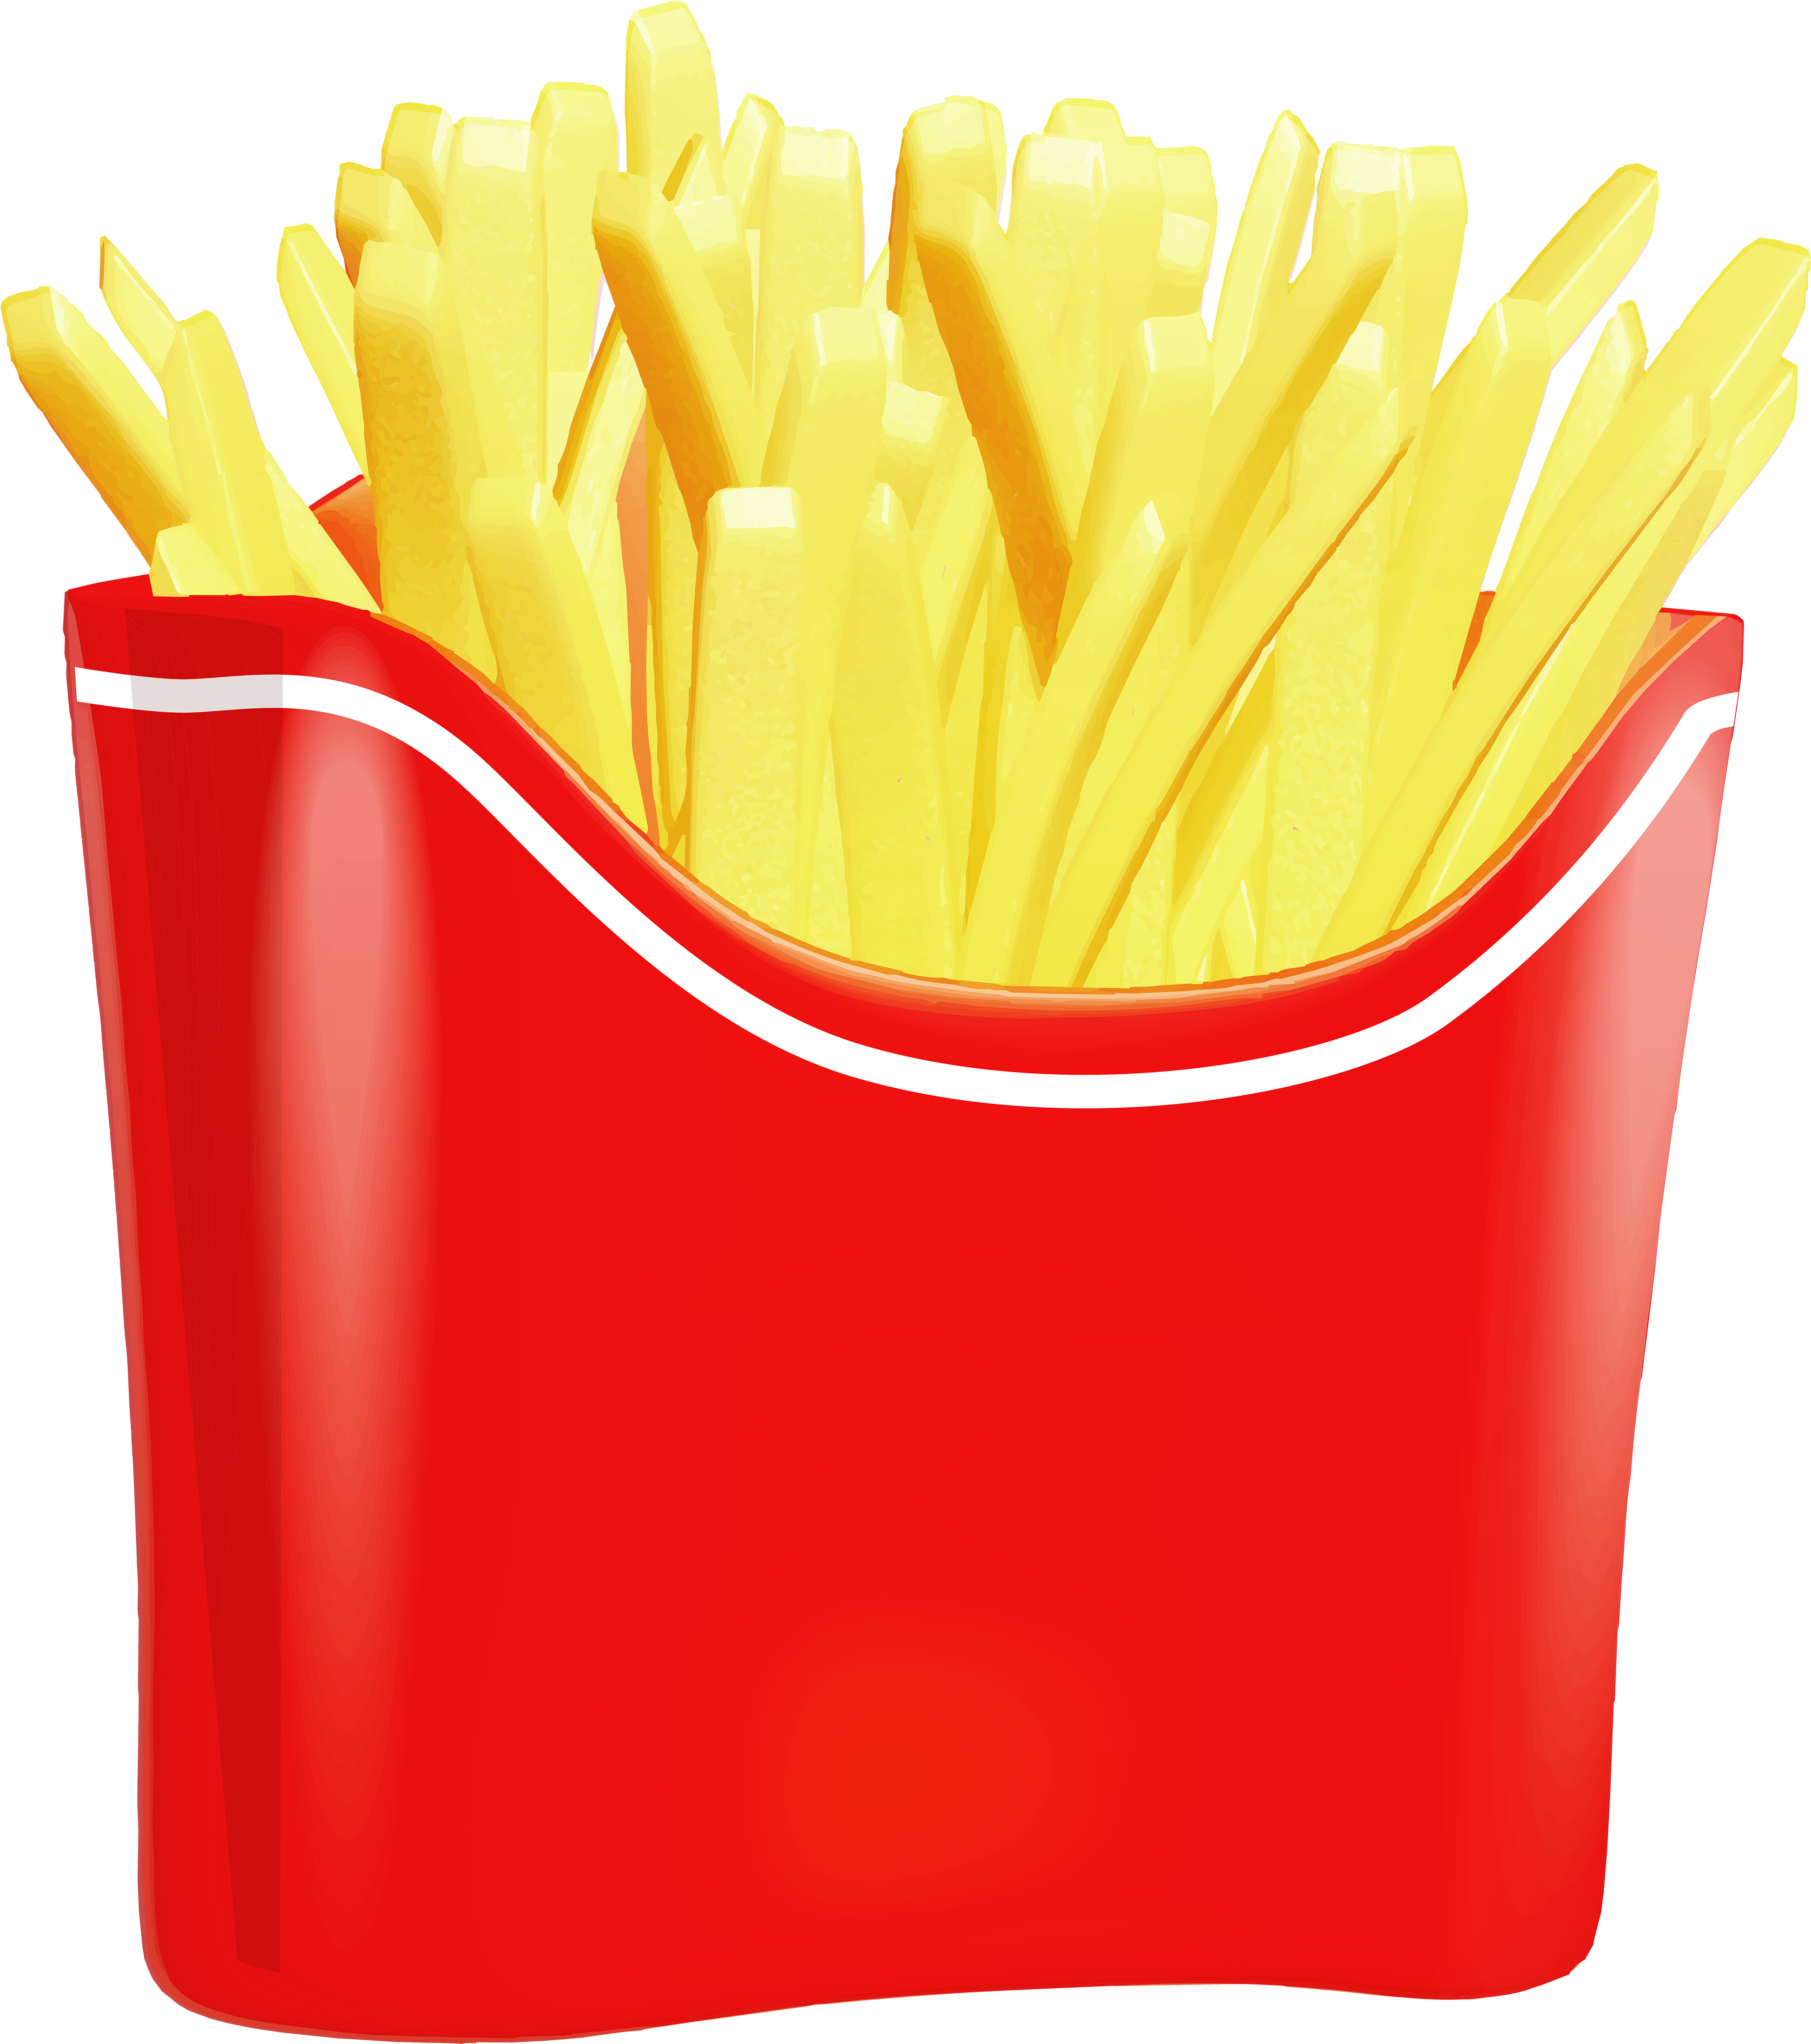 A Red Container With Yellow French Fries